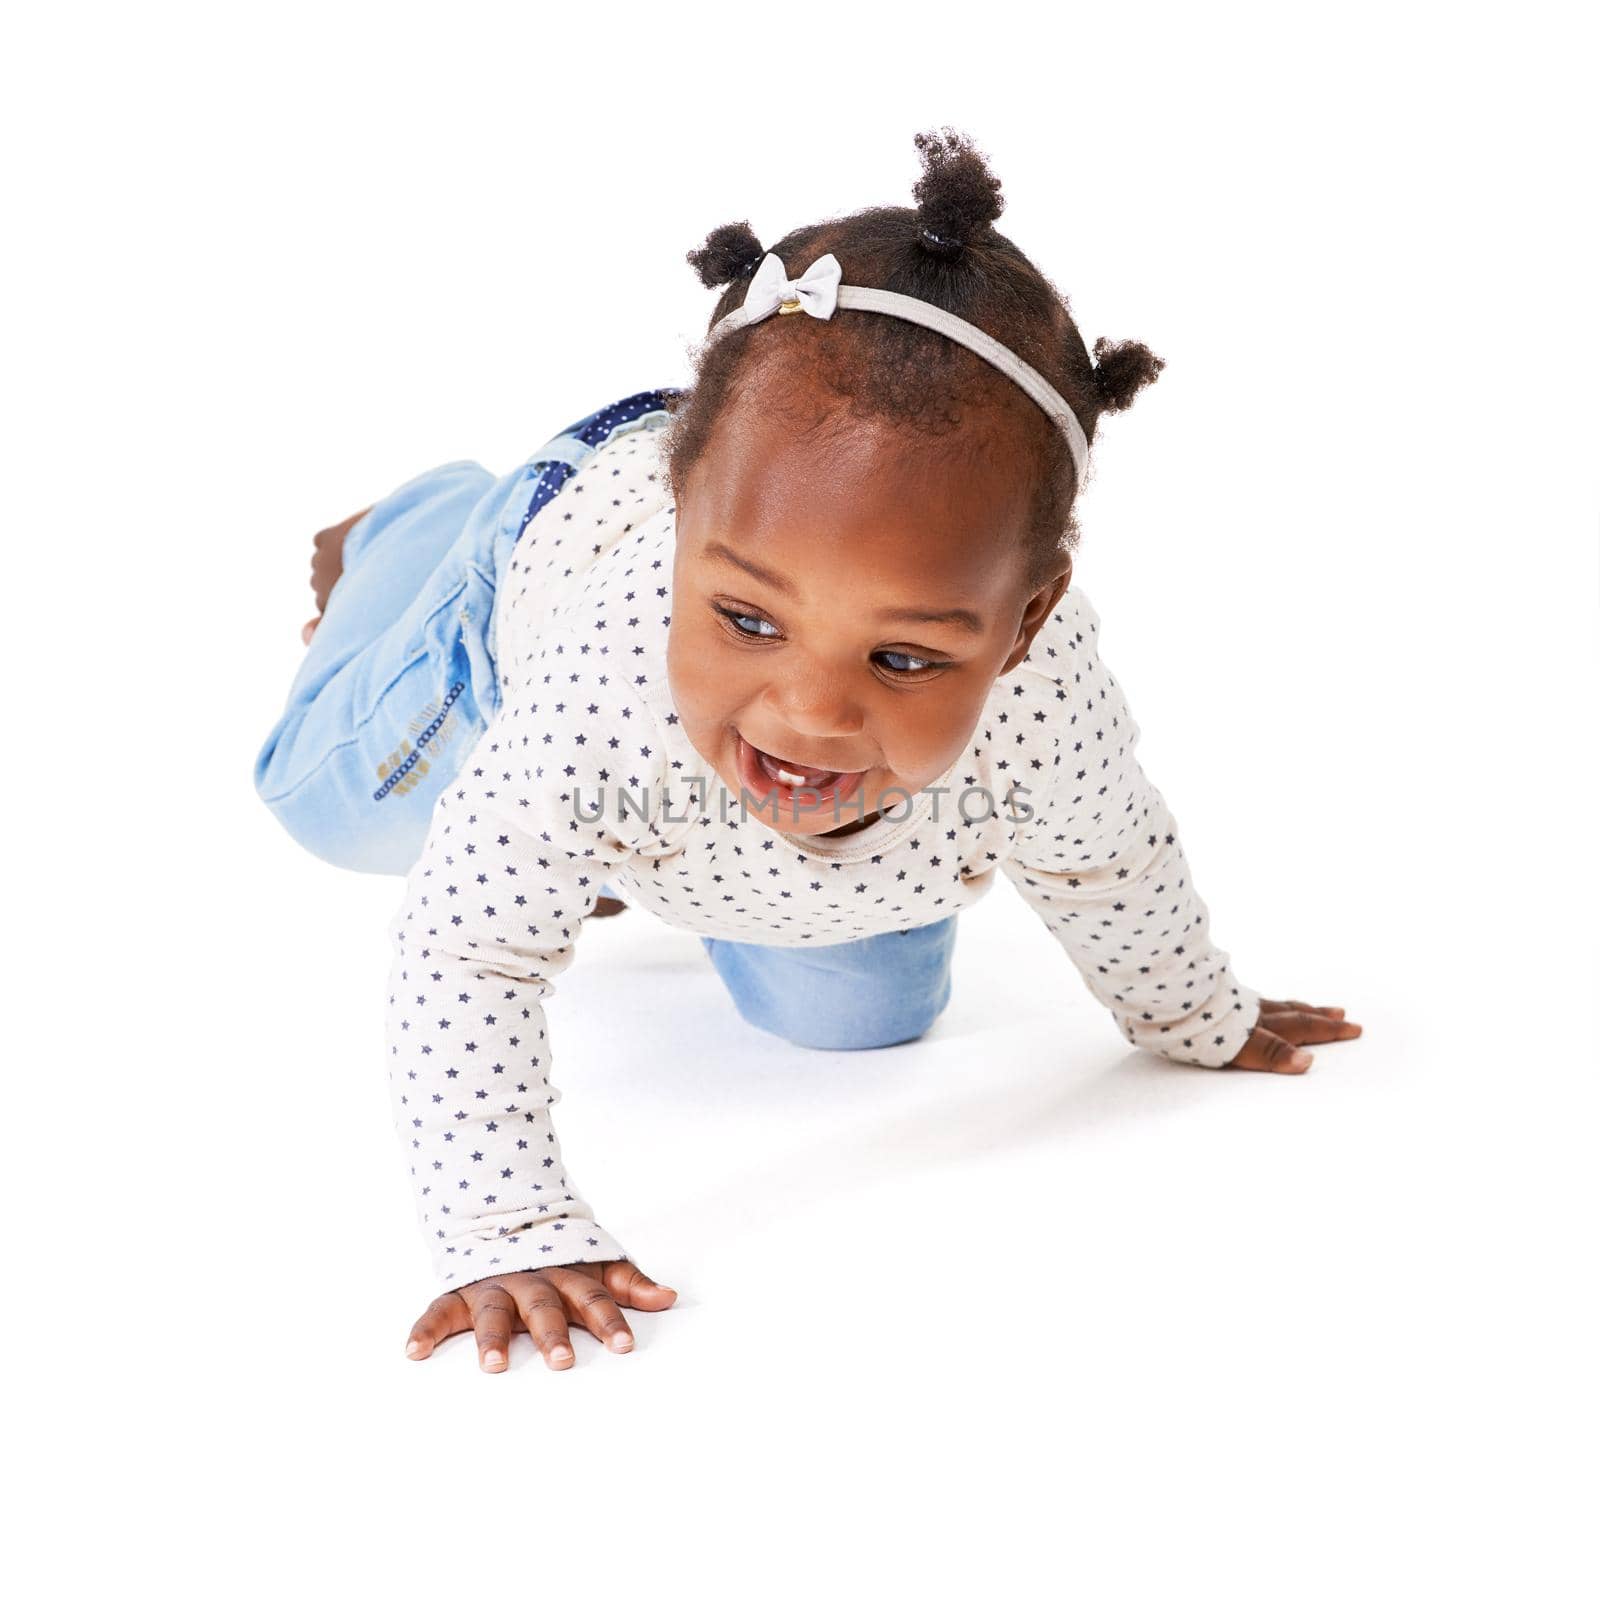 Showing you her new moves. Studio shot of a baby girl crawling against a white background. by YuriArcurs